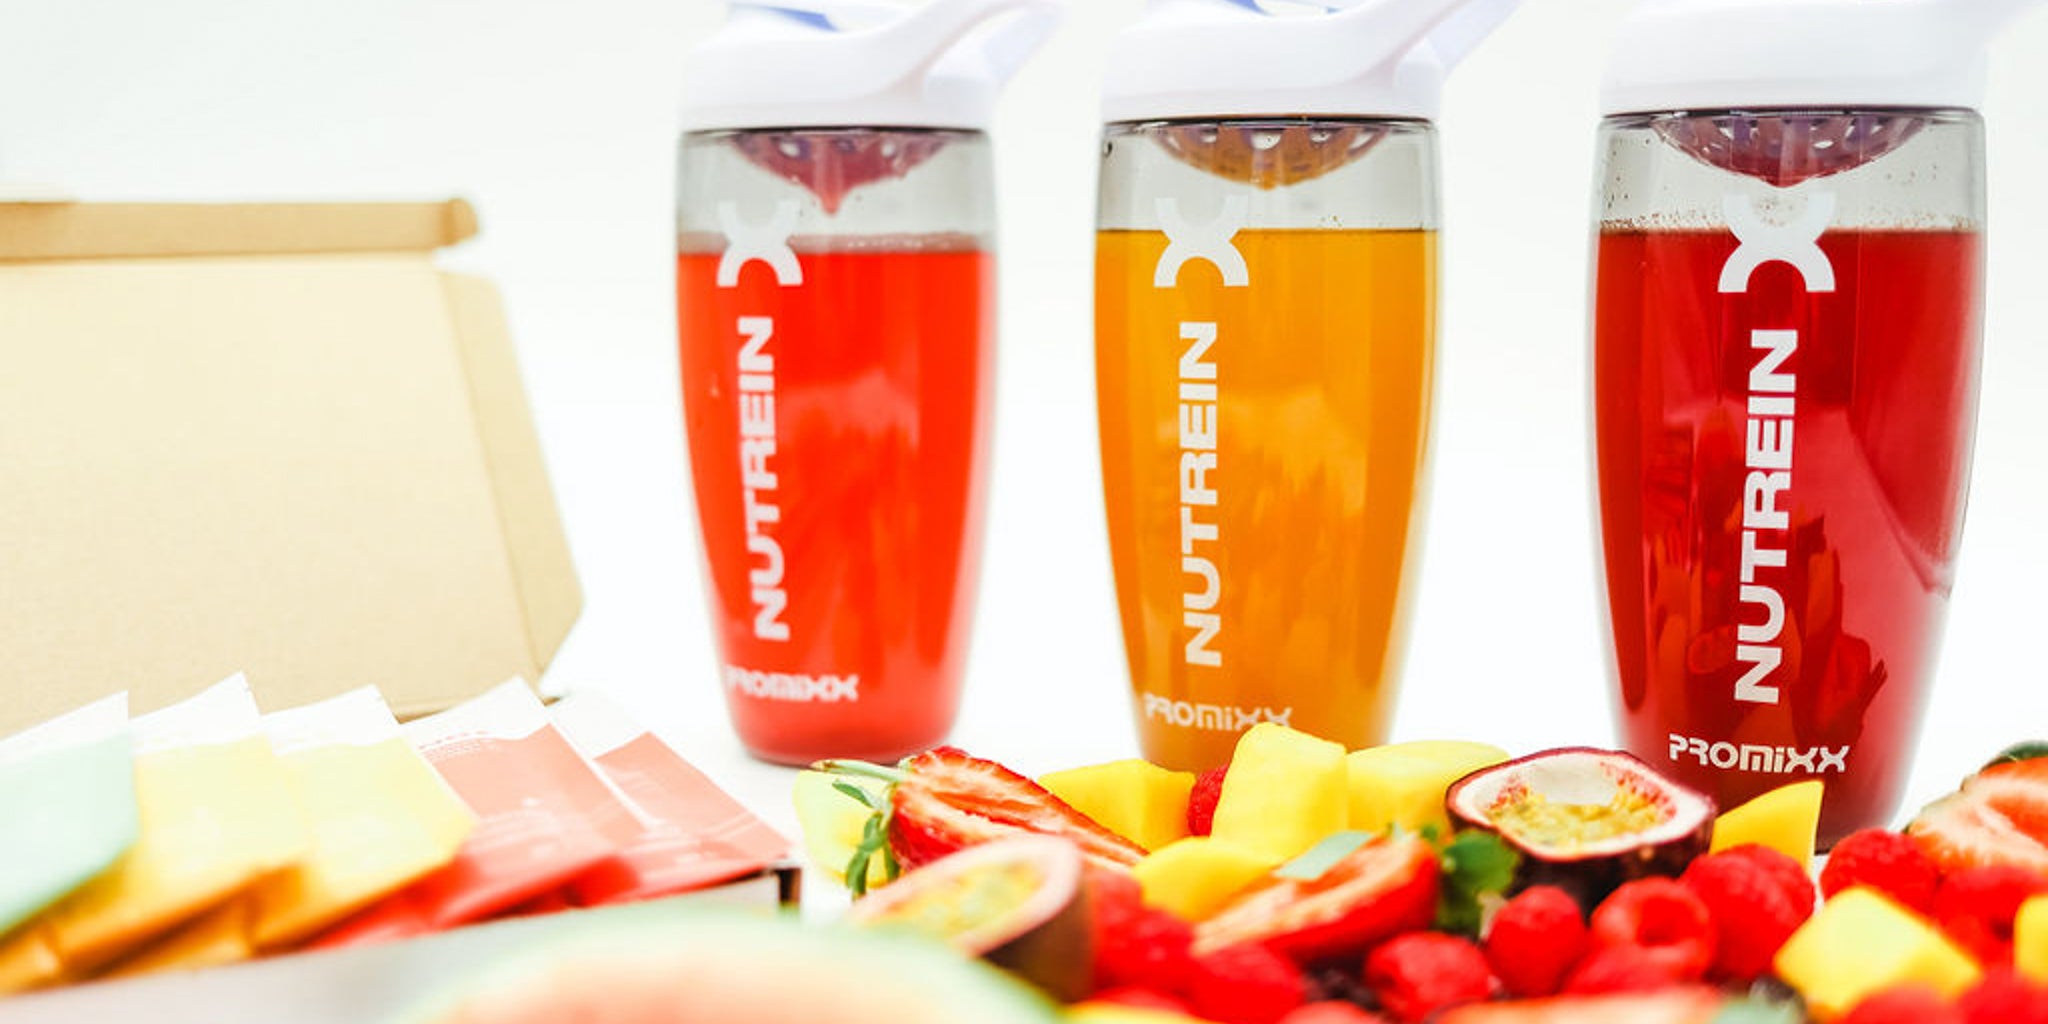  Water based protein shake by Nutrein. Nootropic protein shakes 100% plant based and vegan